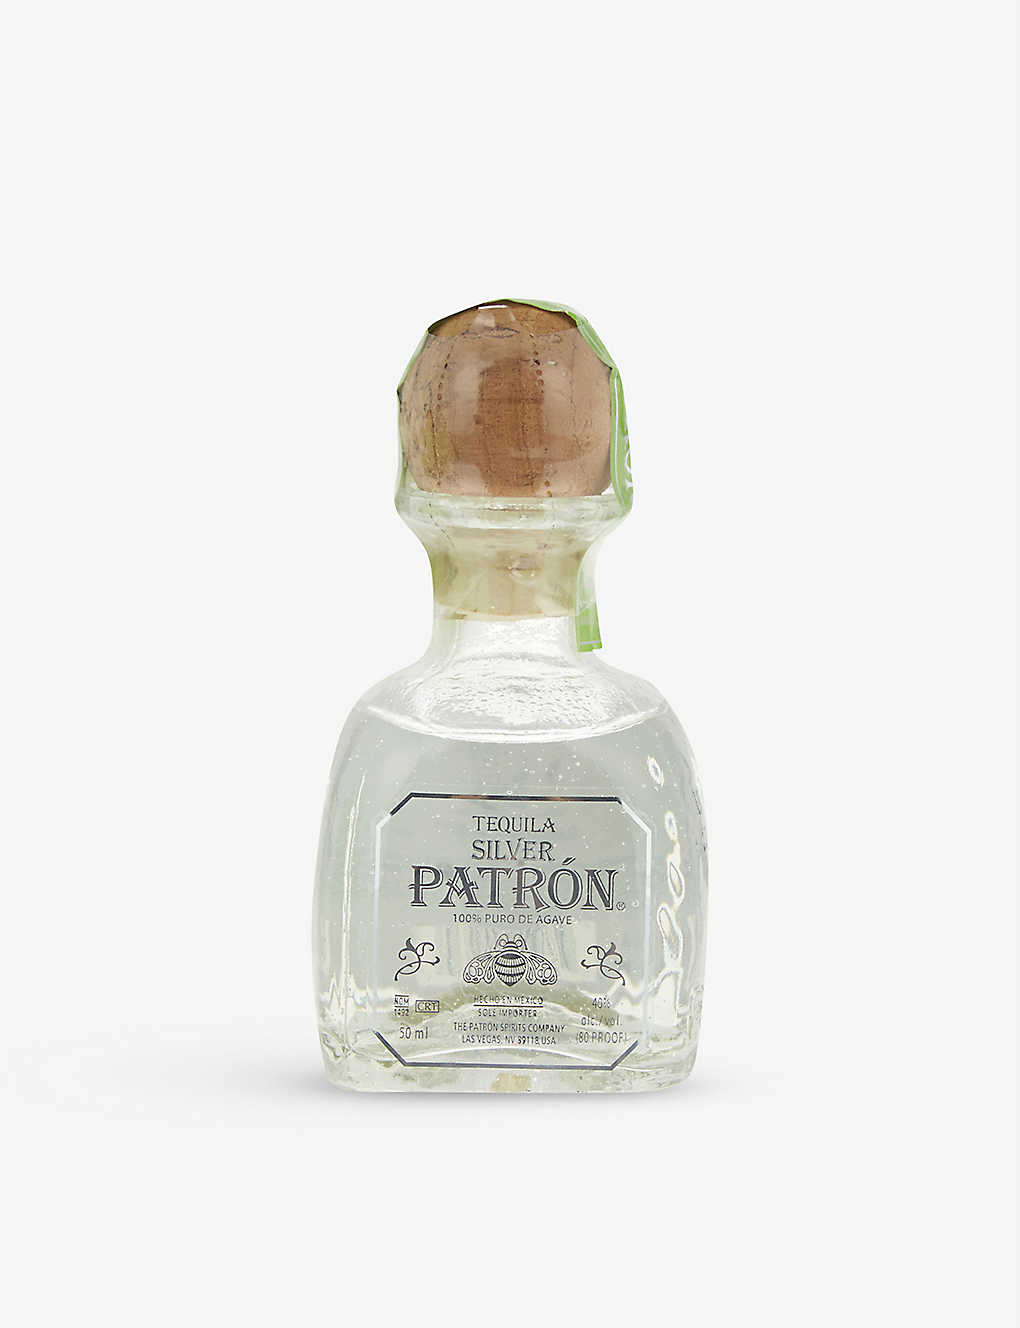 PATRON Silver tequila 50ml